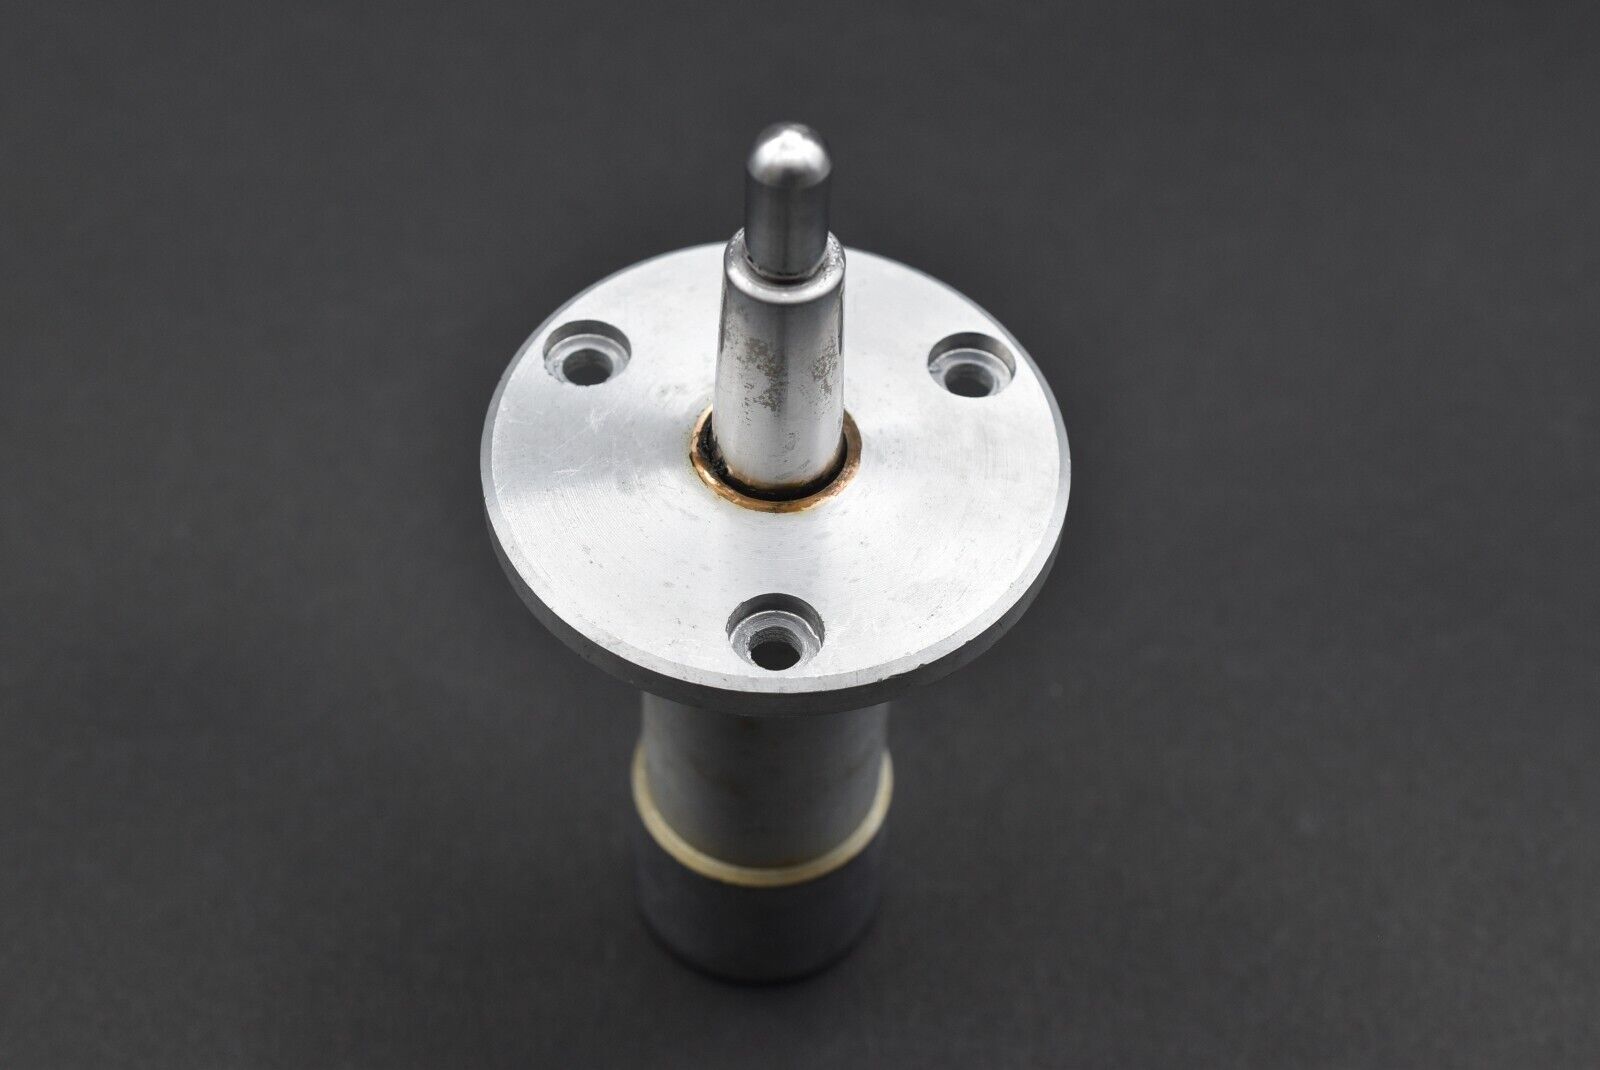 MICRO MR-611 Shaft Assembly Turntable Spindle Parts